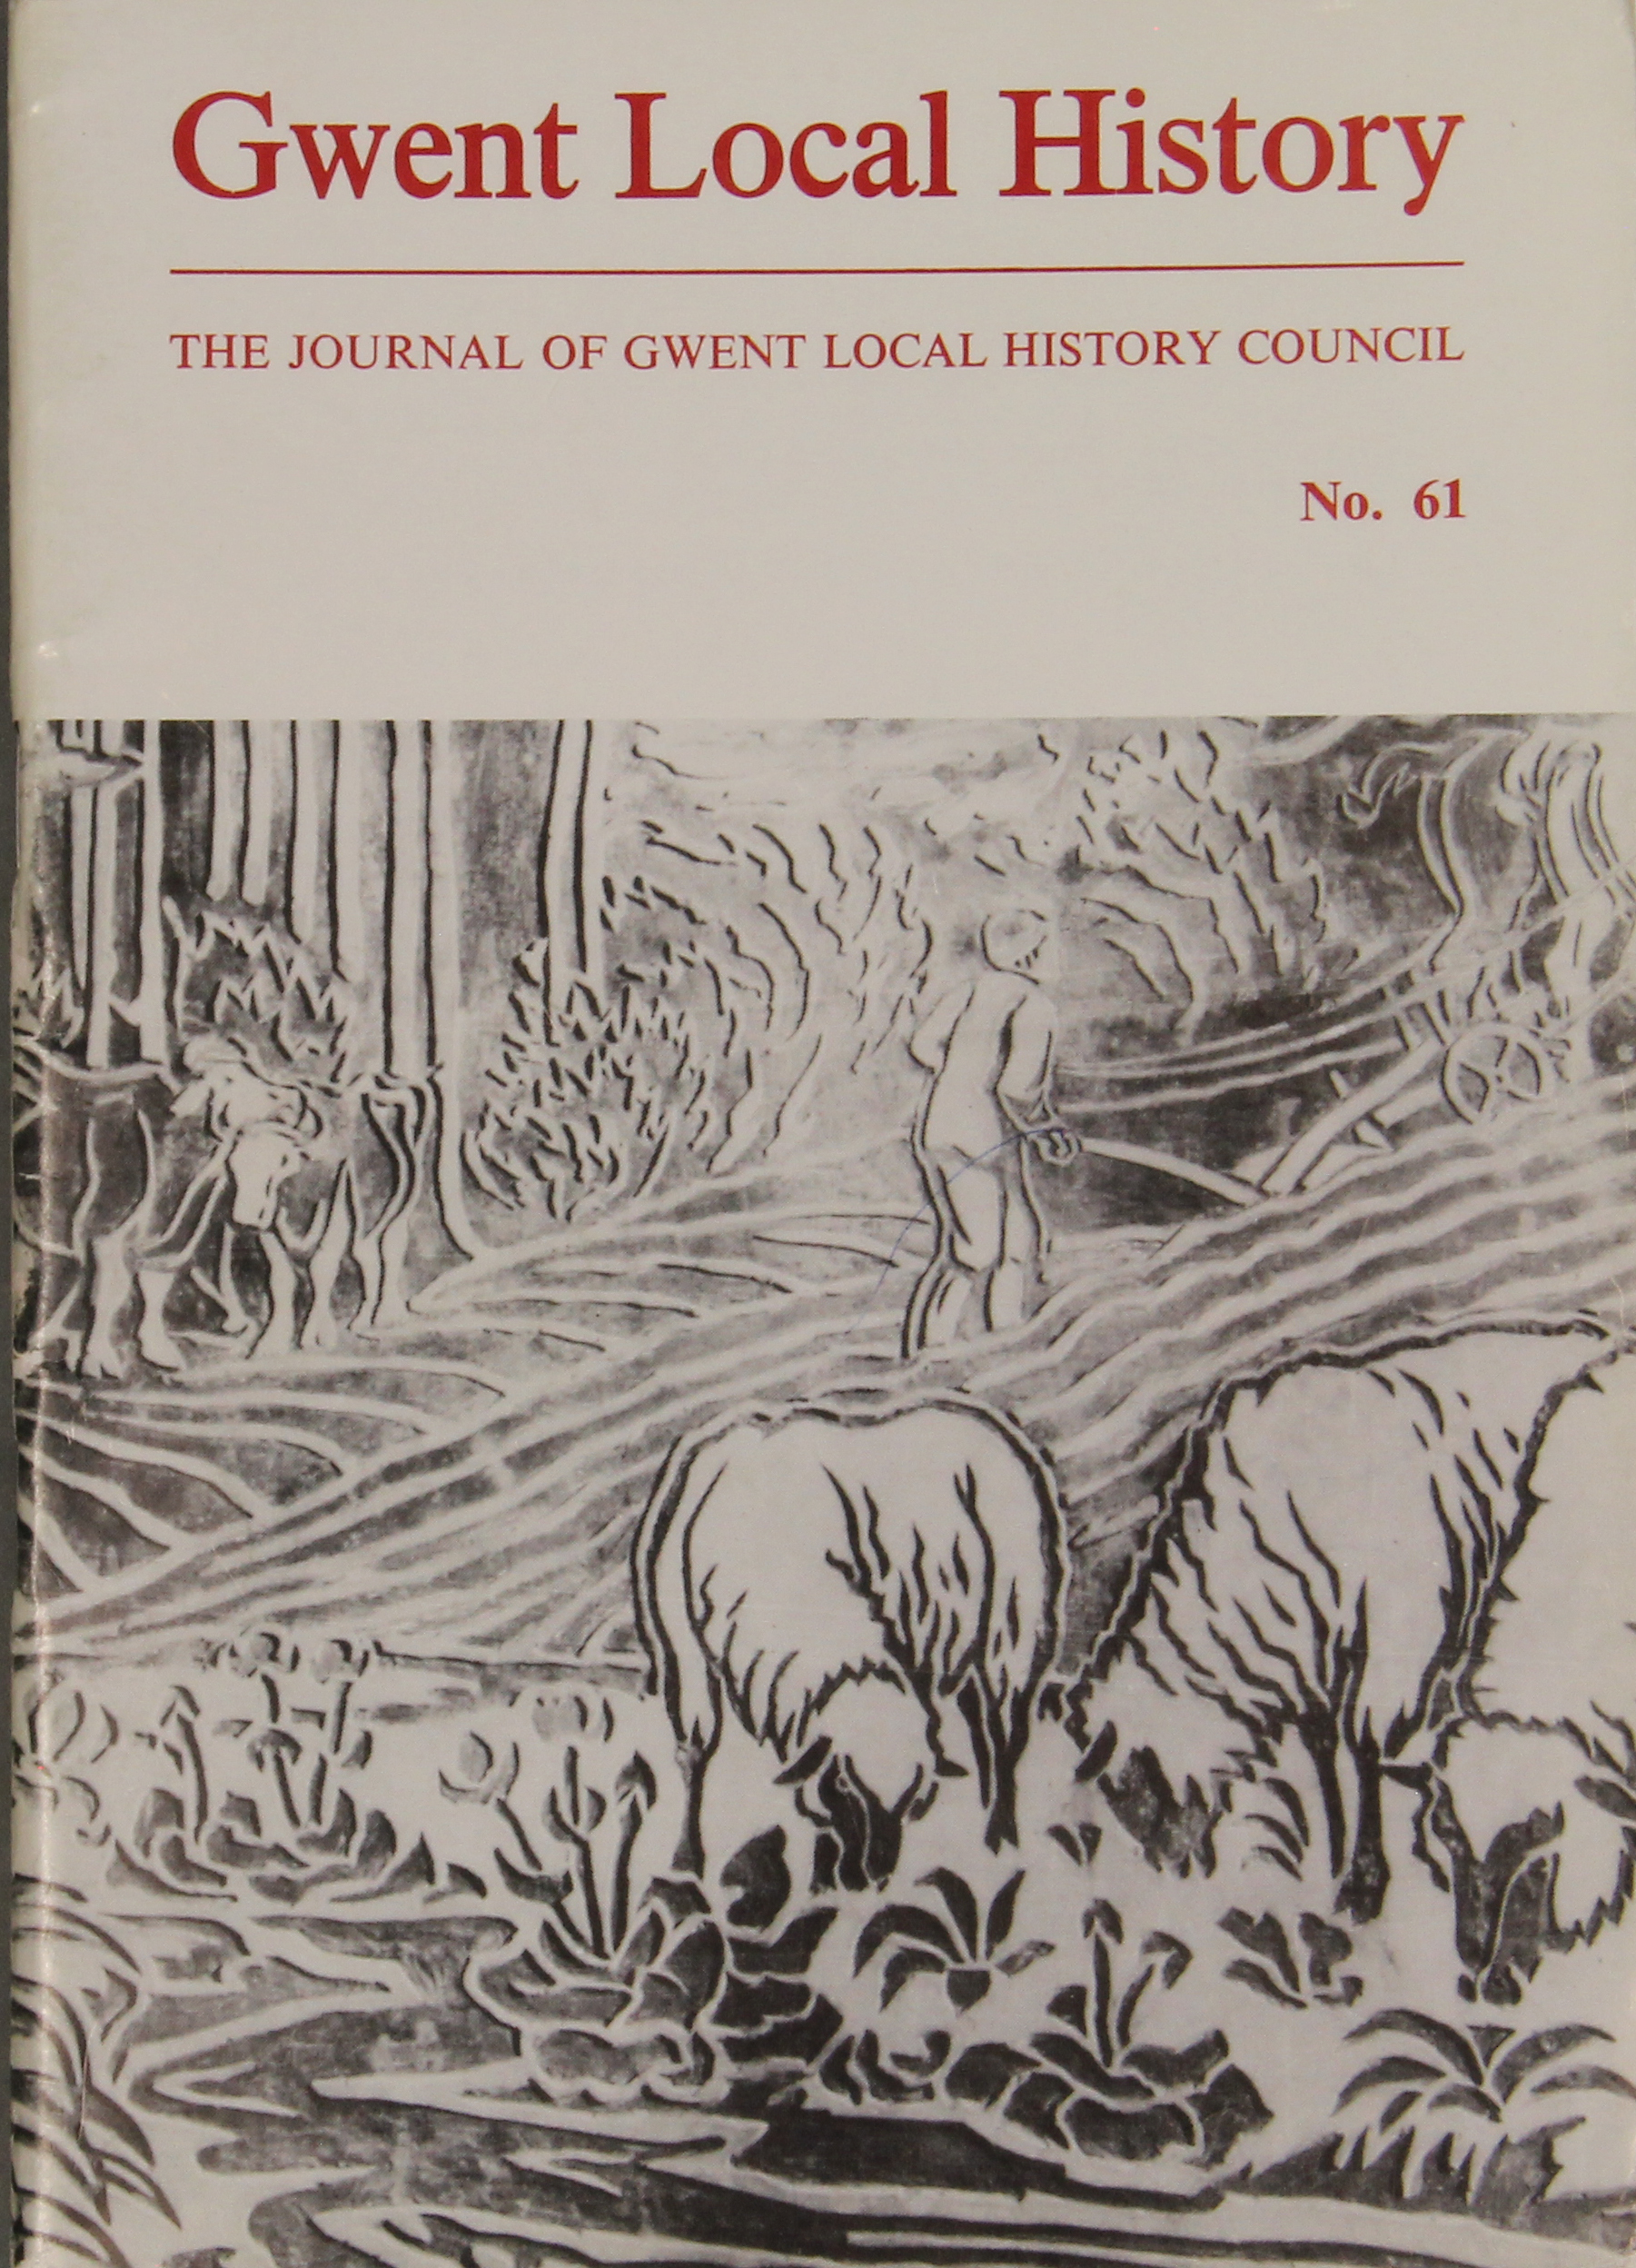 Gwent Local History: Journal of the Gwent Local History Council No.61, Autumn 1986, £2.00